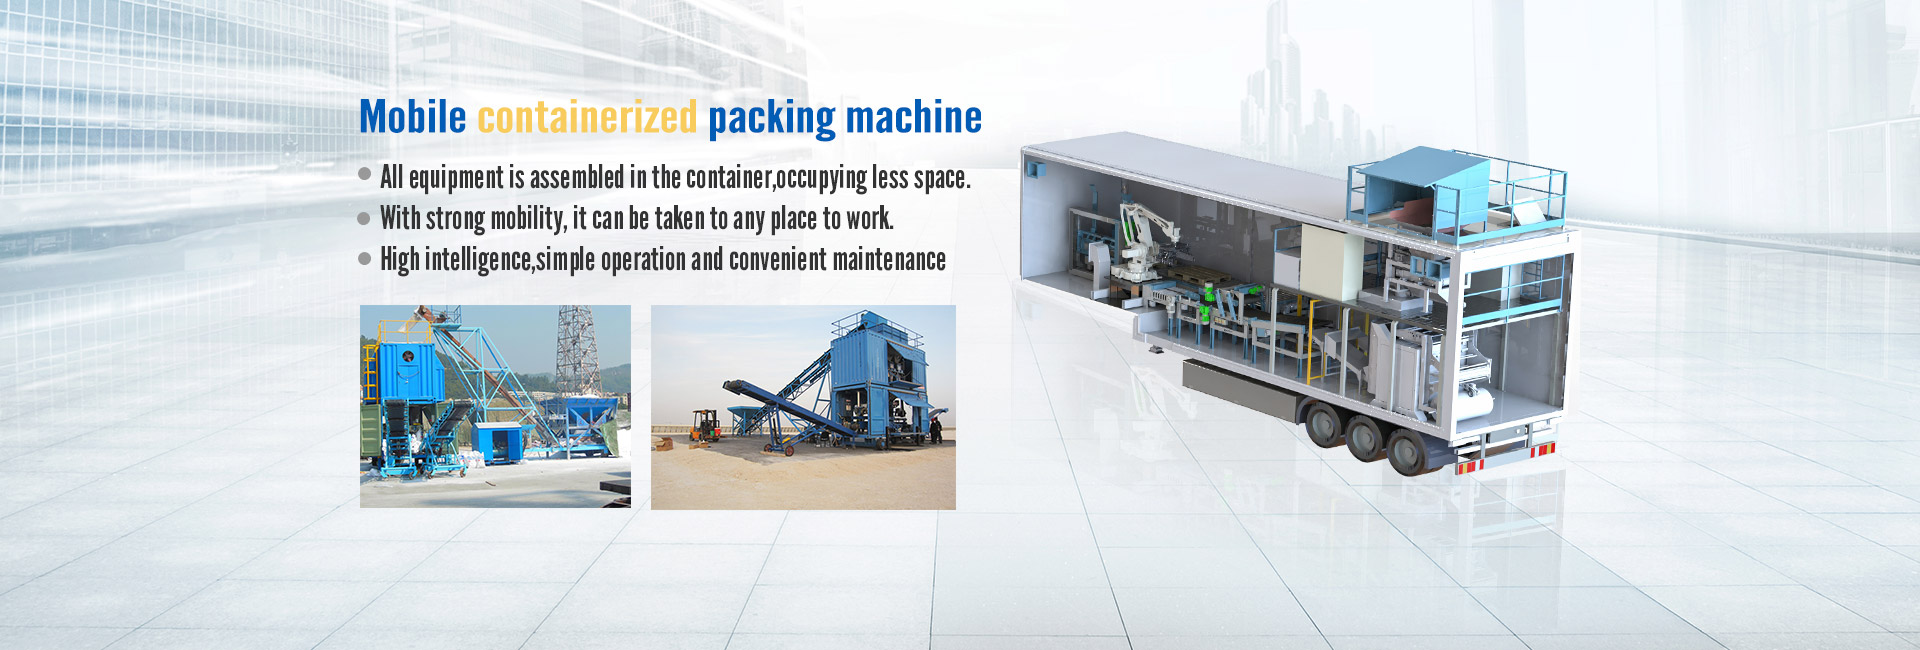 Mobile containerized packing machine,mobile bagging machine